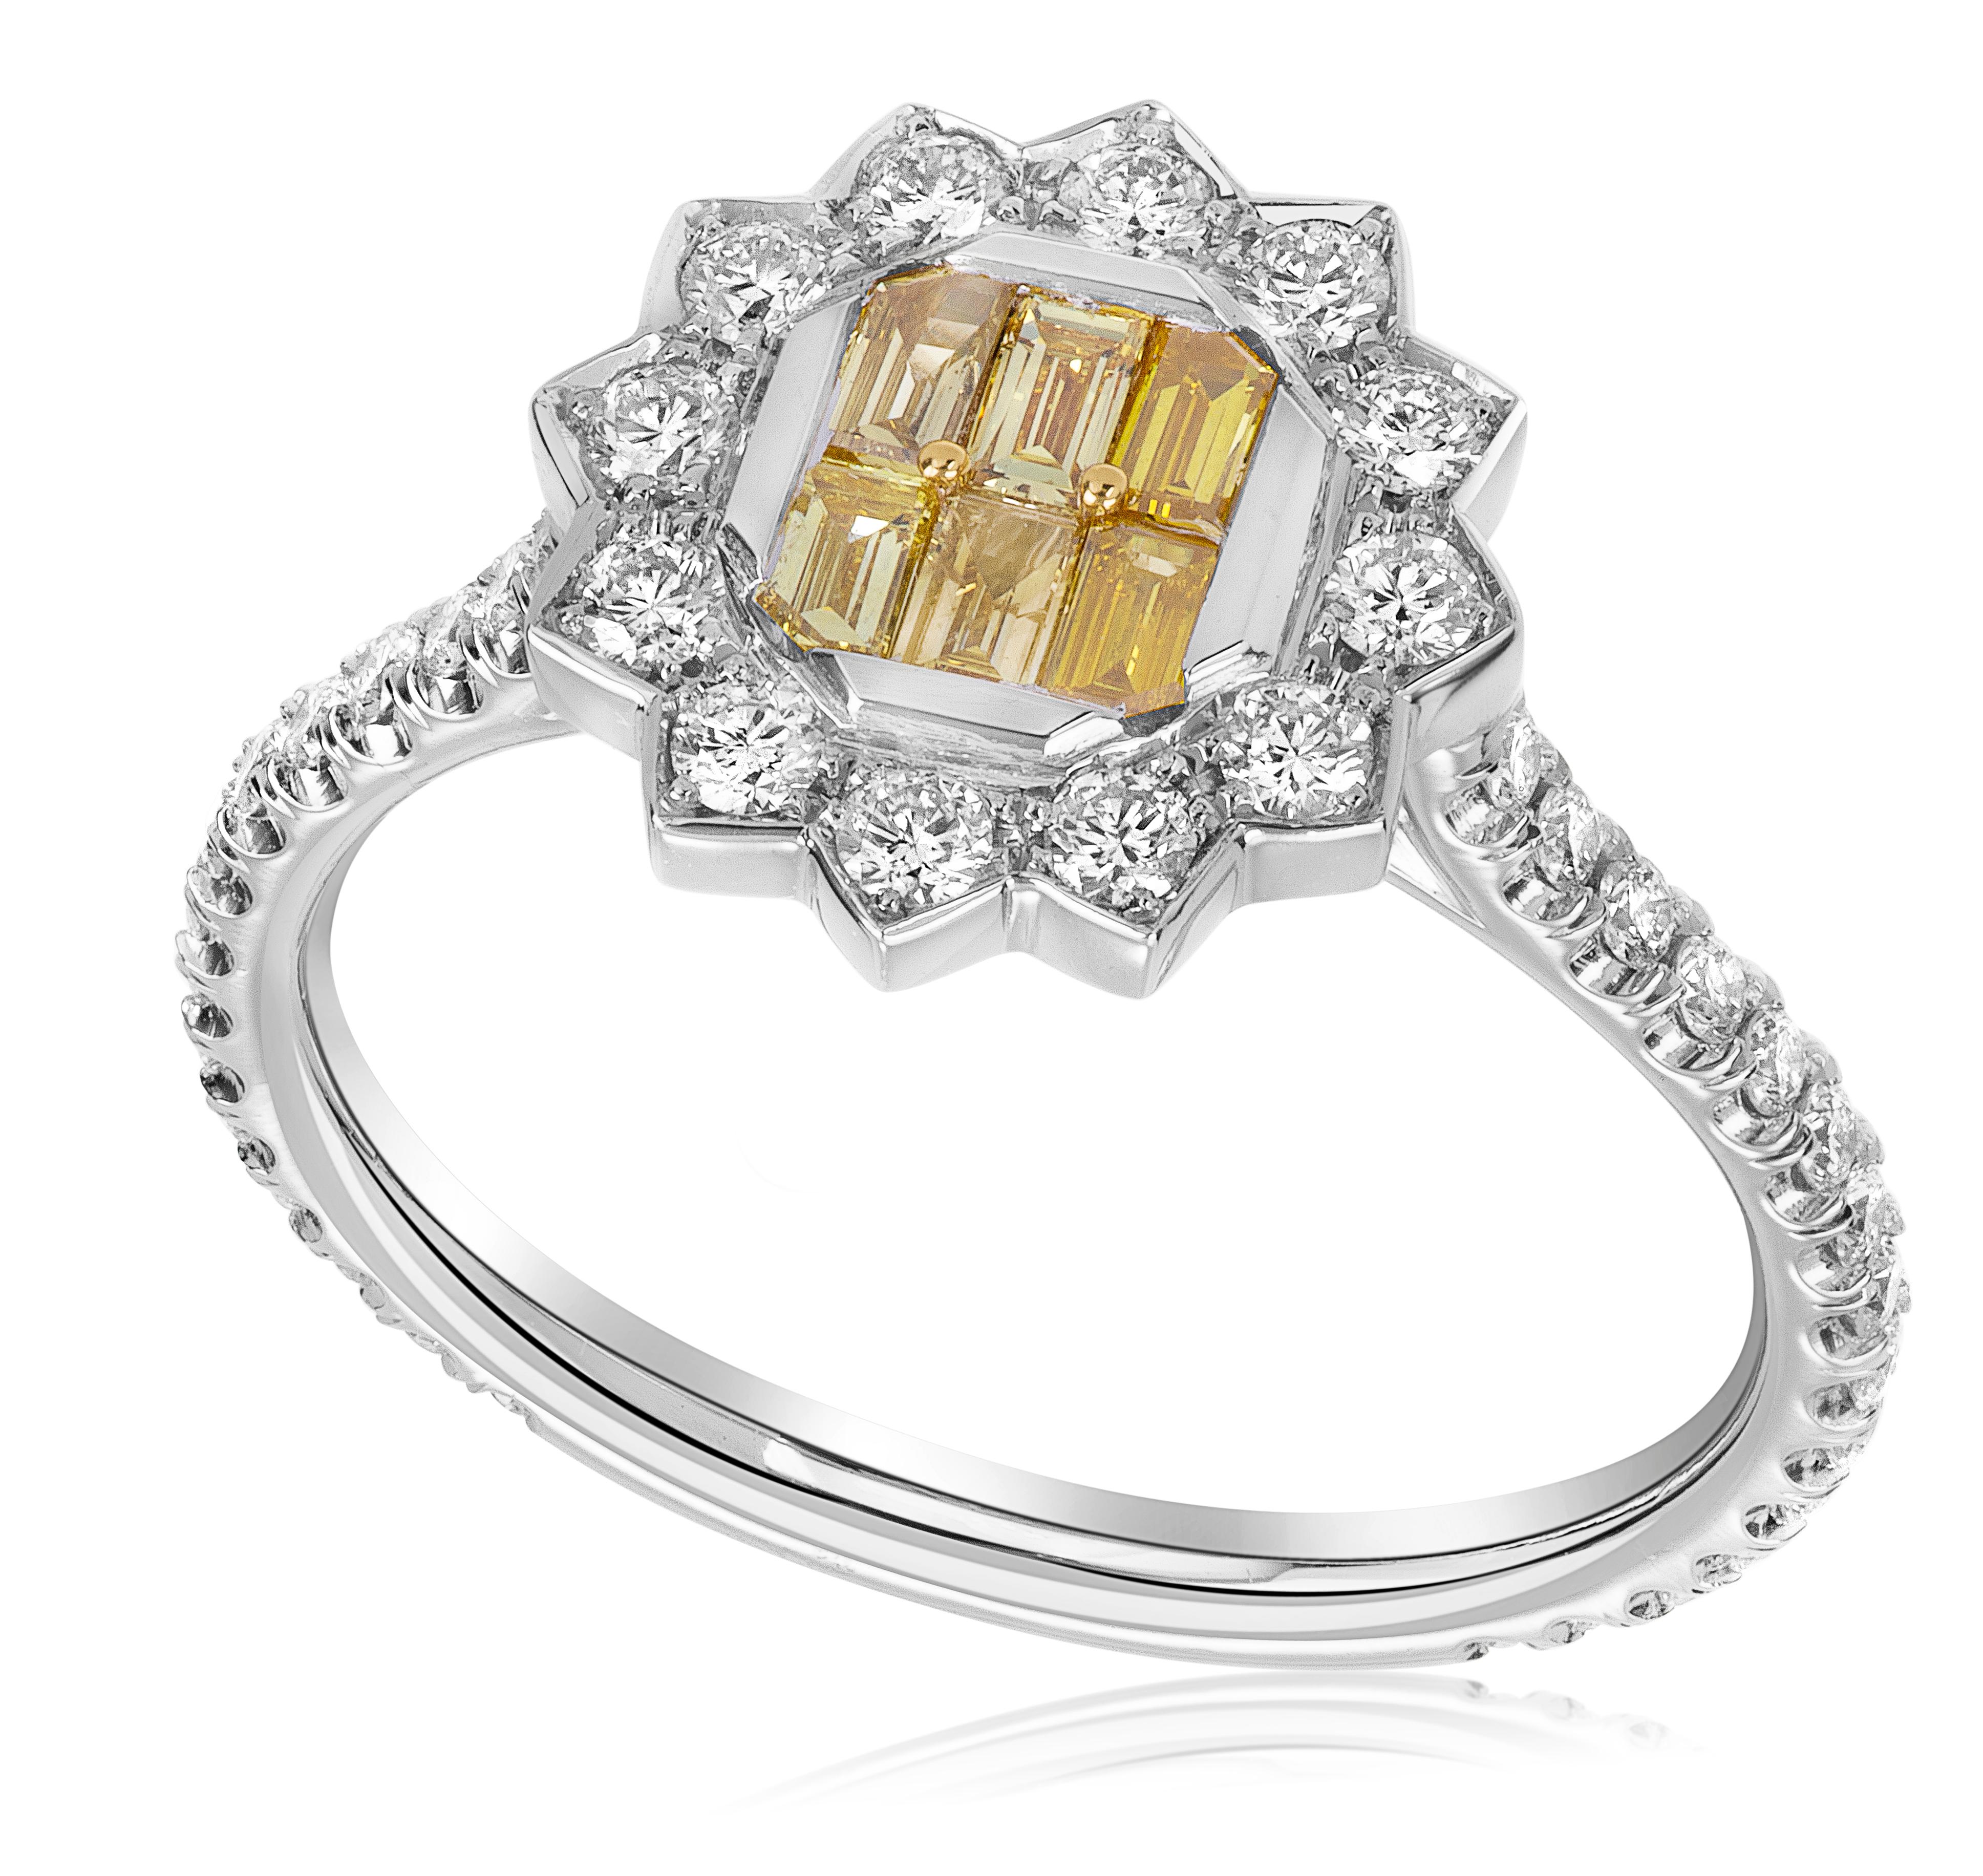 Make a bold and captivating statement with our exquisite yellow baguette ring. This stunning piece features a total of 0.25 carats of fancy vivid yellow diamonds, showcasing their vibrant and intense yellow color. The baguette-cut diamonds are